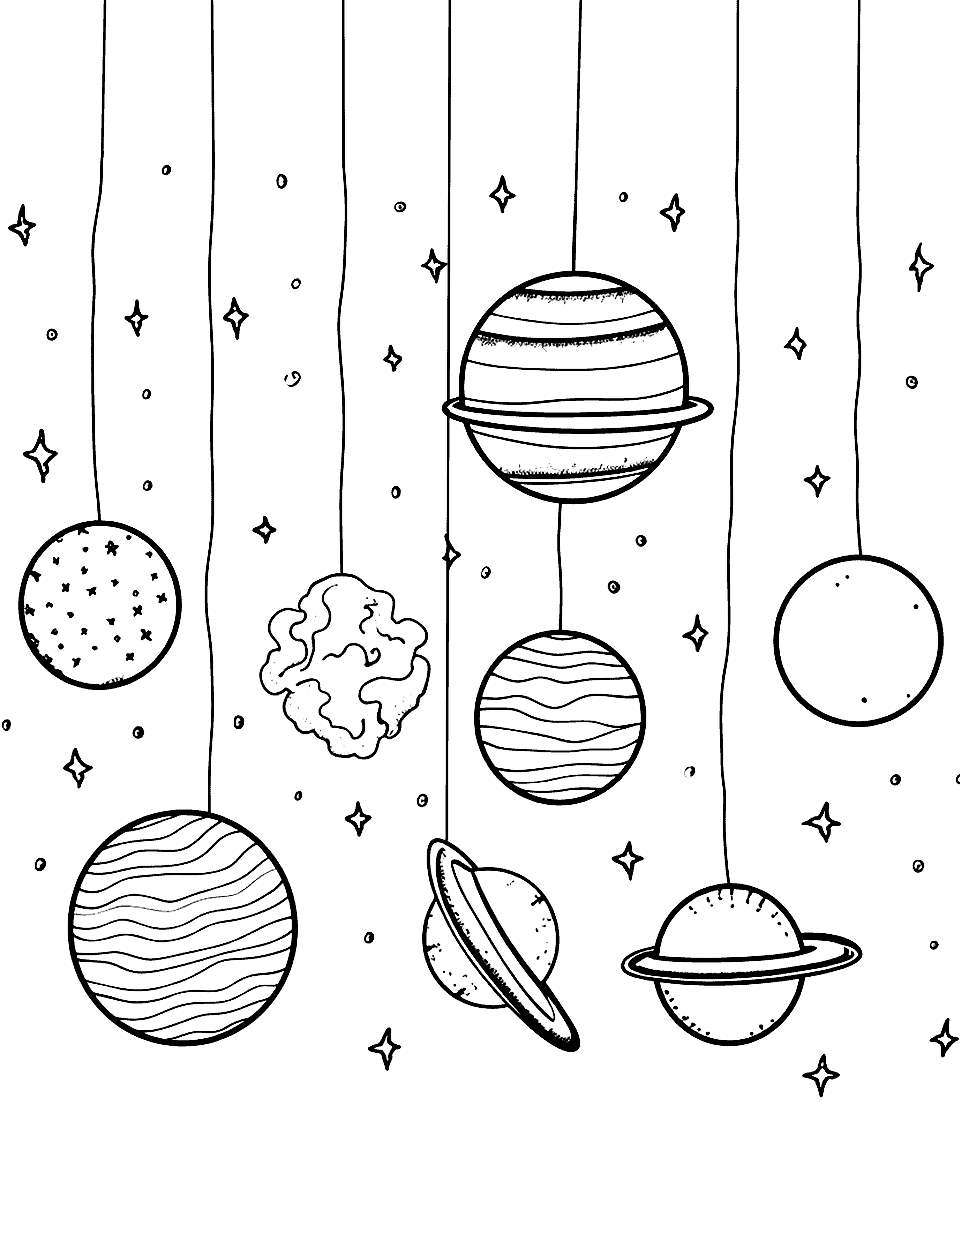 Planet Parade Piece Solar System Coloring Page - All eight planets on a hook for a house decoration piece.